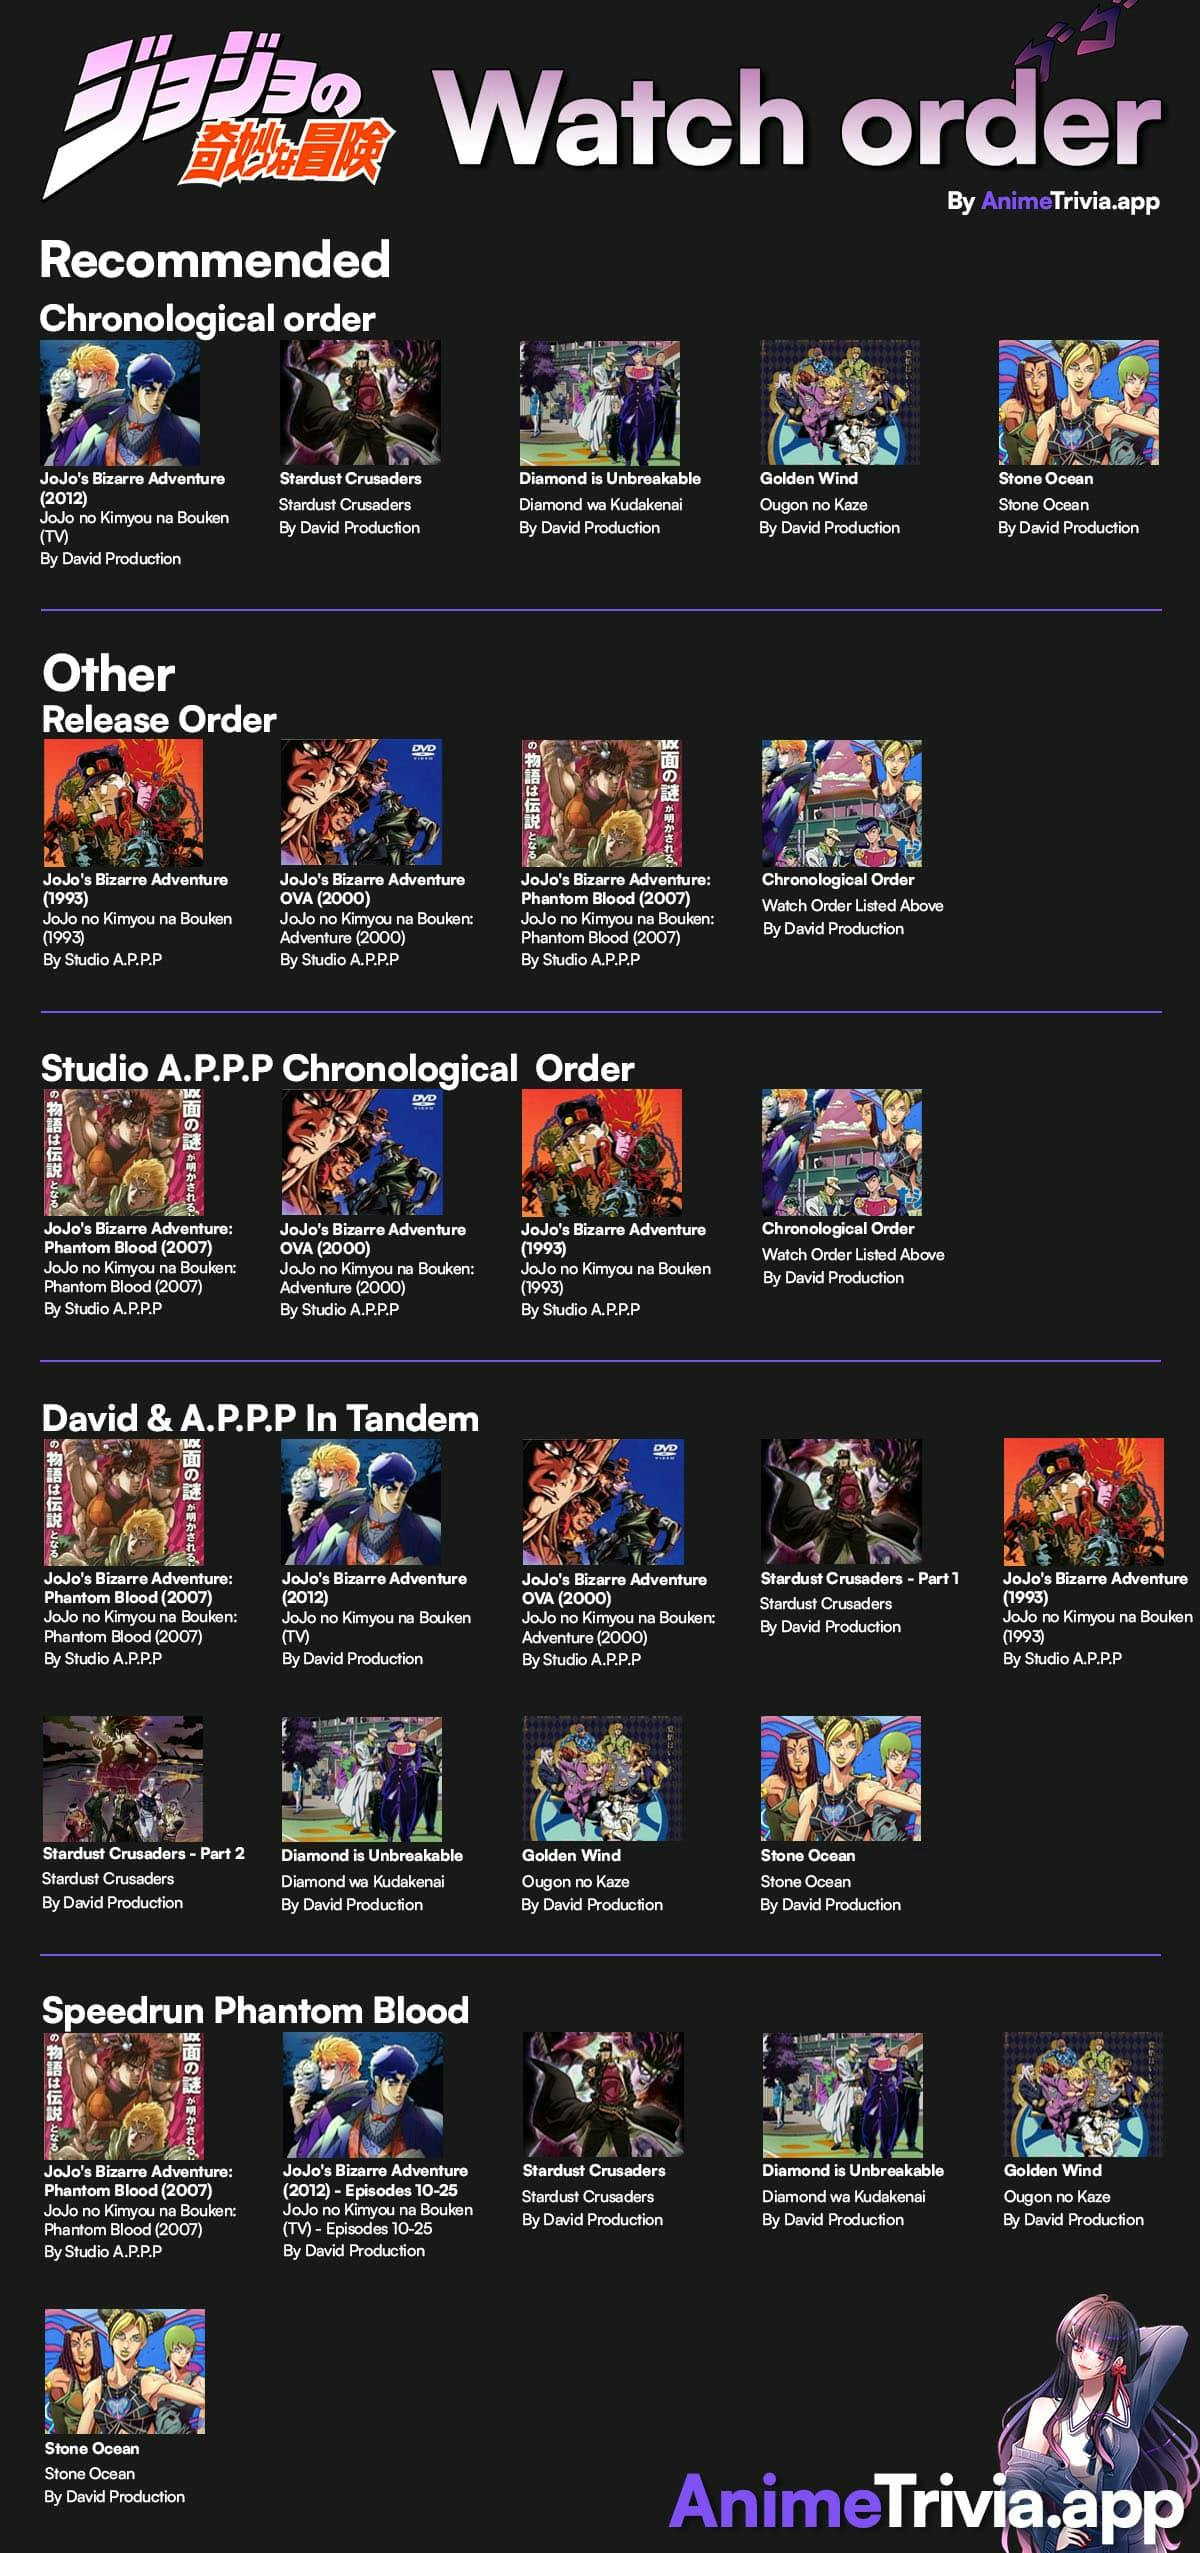 A watch order graphic for JoJo's Bizarre Adventure, recommending the chronological order, with images of each season displayed in the correct sequence. Alternative watch orders are also provided, allowing users to explore different viewing options based on personal preference and storytelling preferences.